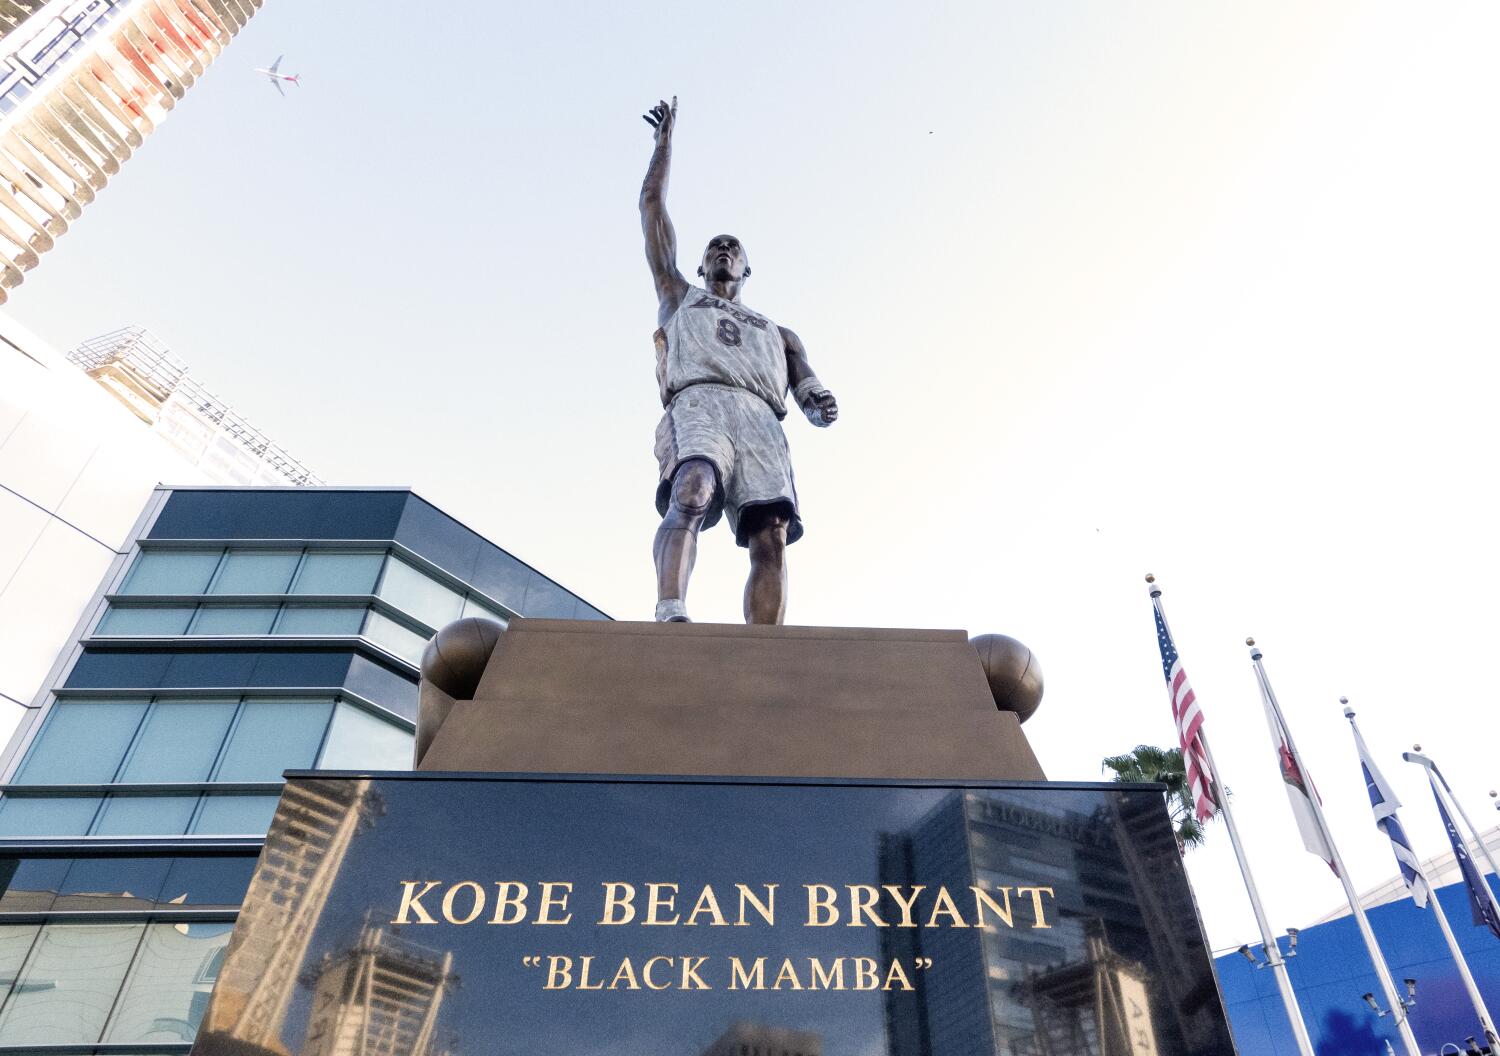 Good thing that Kobe Bryant is getting three statues. The first one has typos